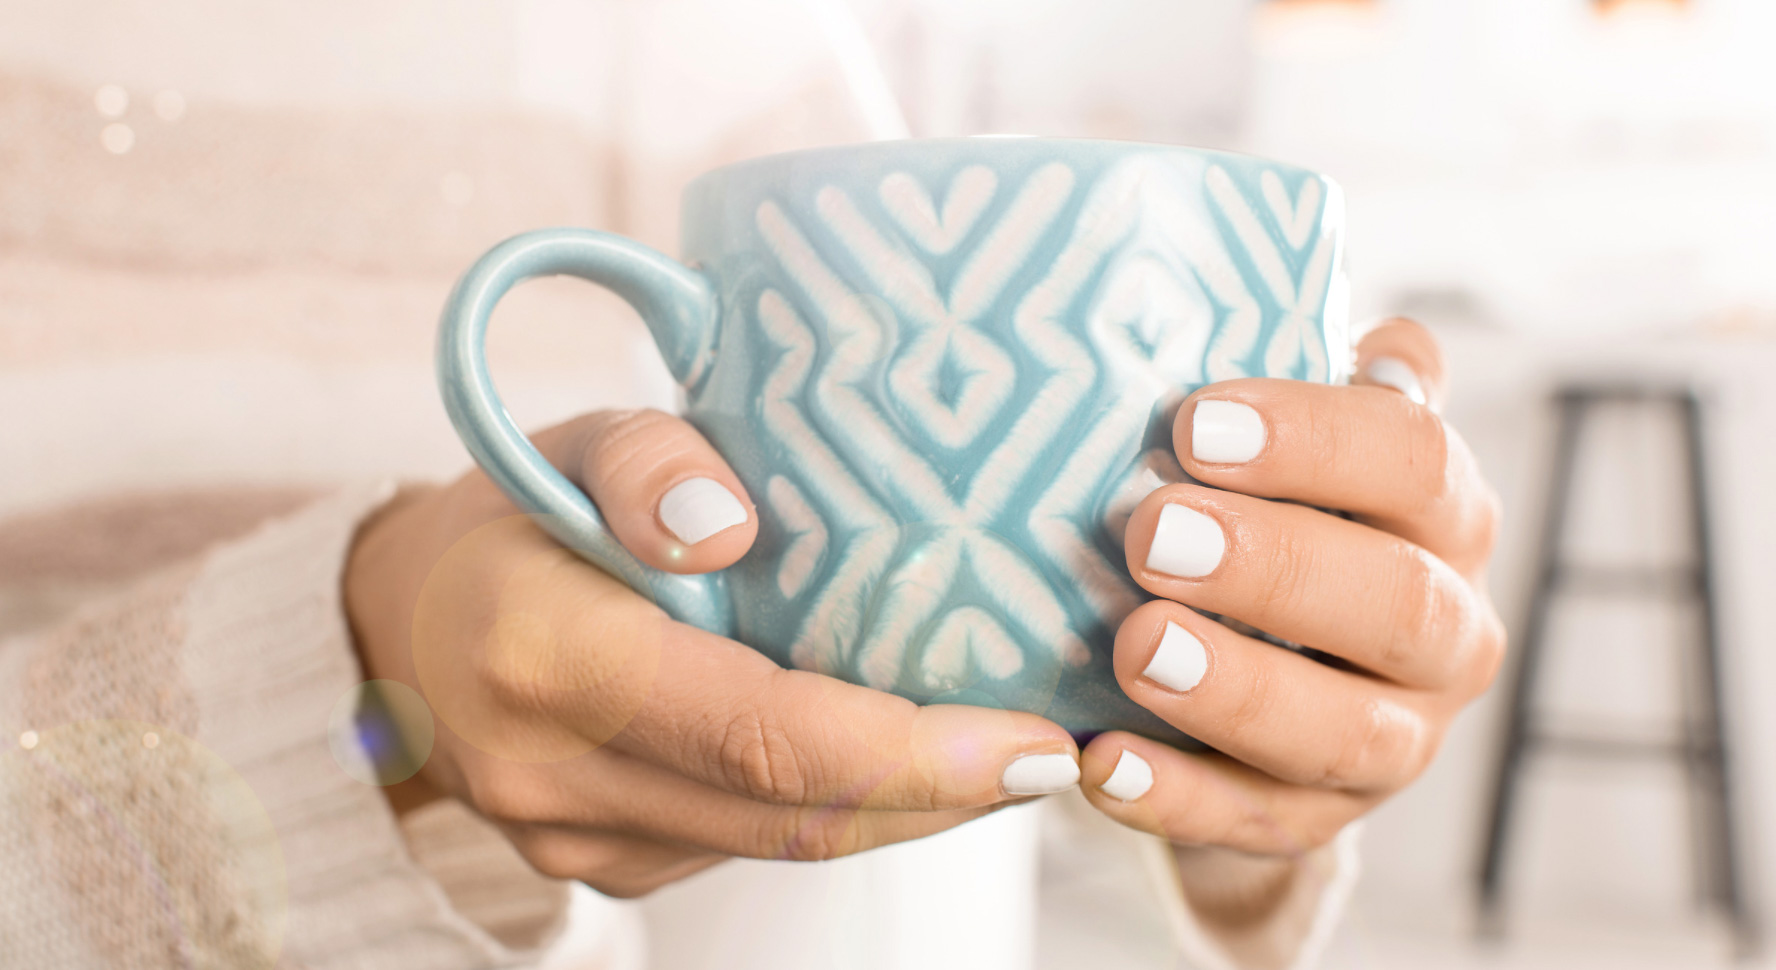 Holding a cup of tea. Image - Canva